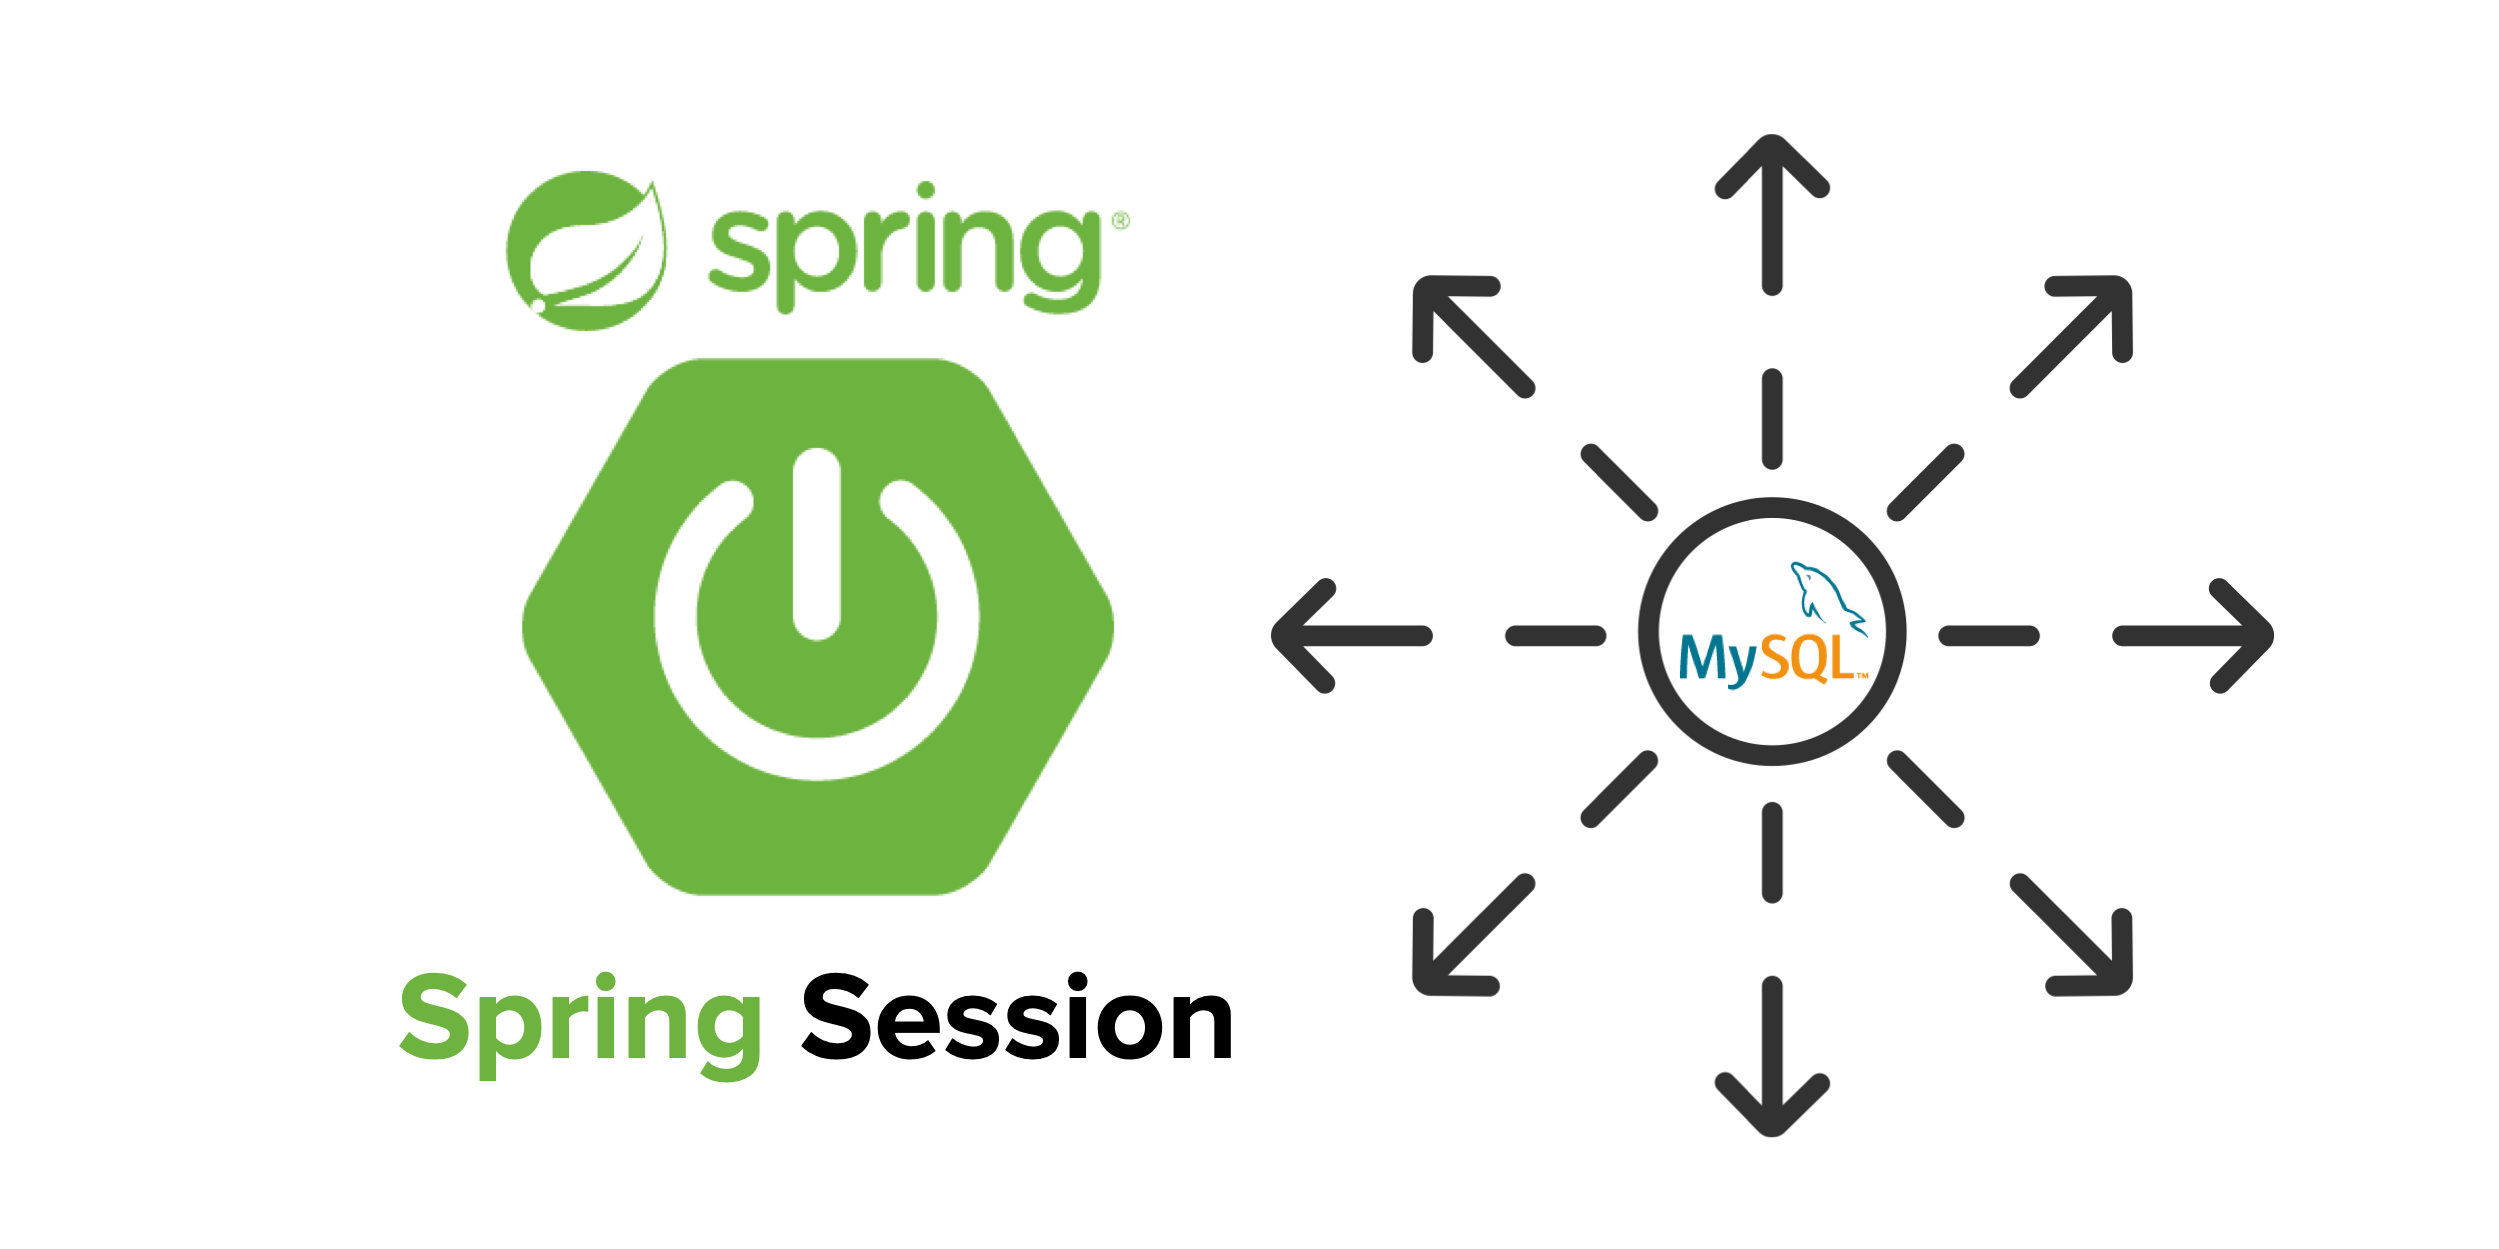 Easy Session Sharing in Spring Boot with Spring Session and MySQL